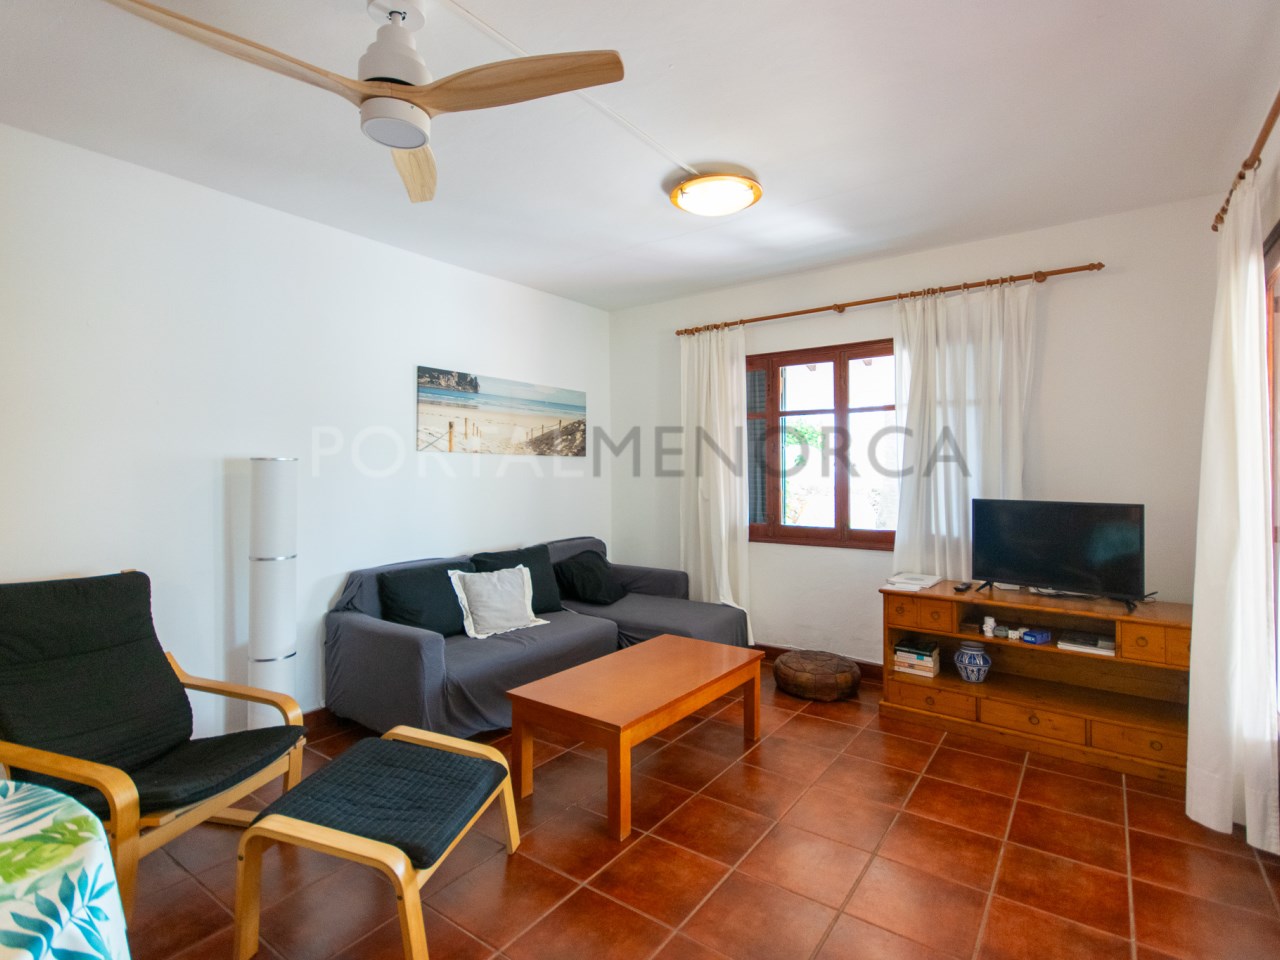 Living room of a villa with tourist license for sale in Cala n Bosch